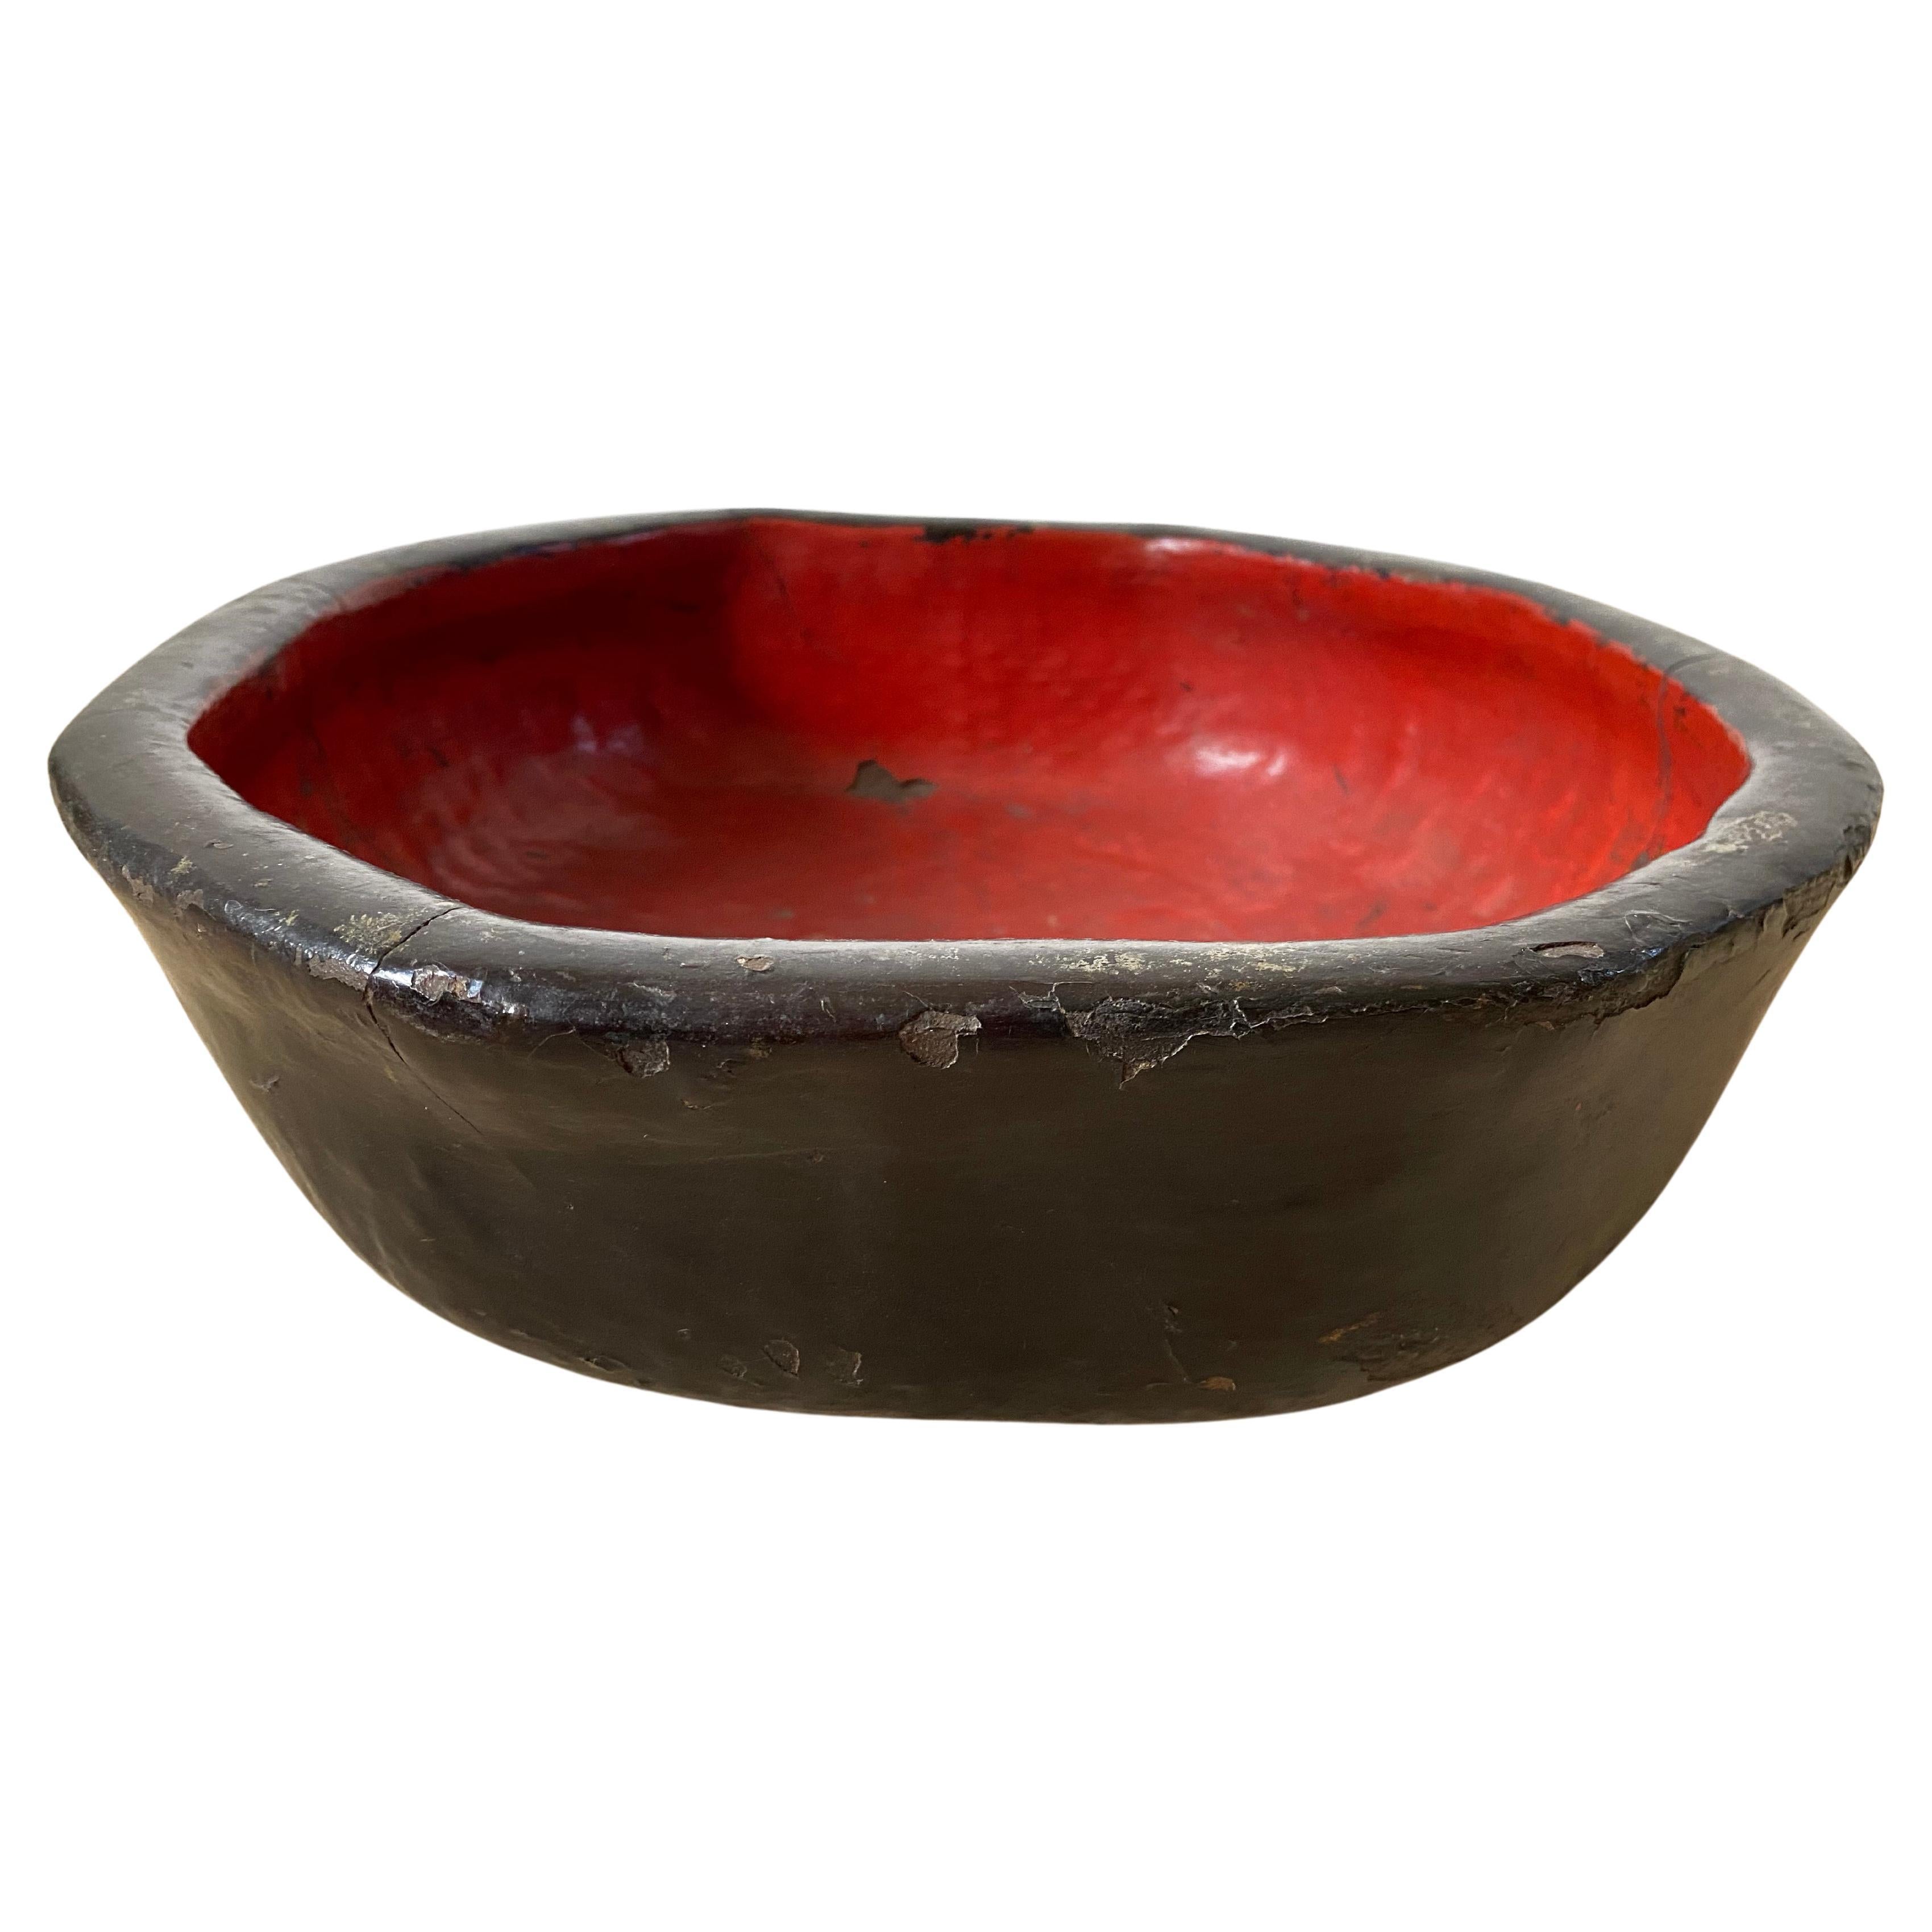 Japanese Red & Black Lacquer Bowl, Early 20th Century